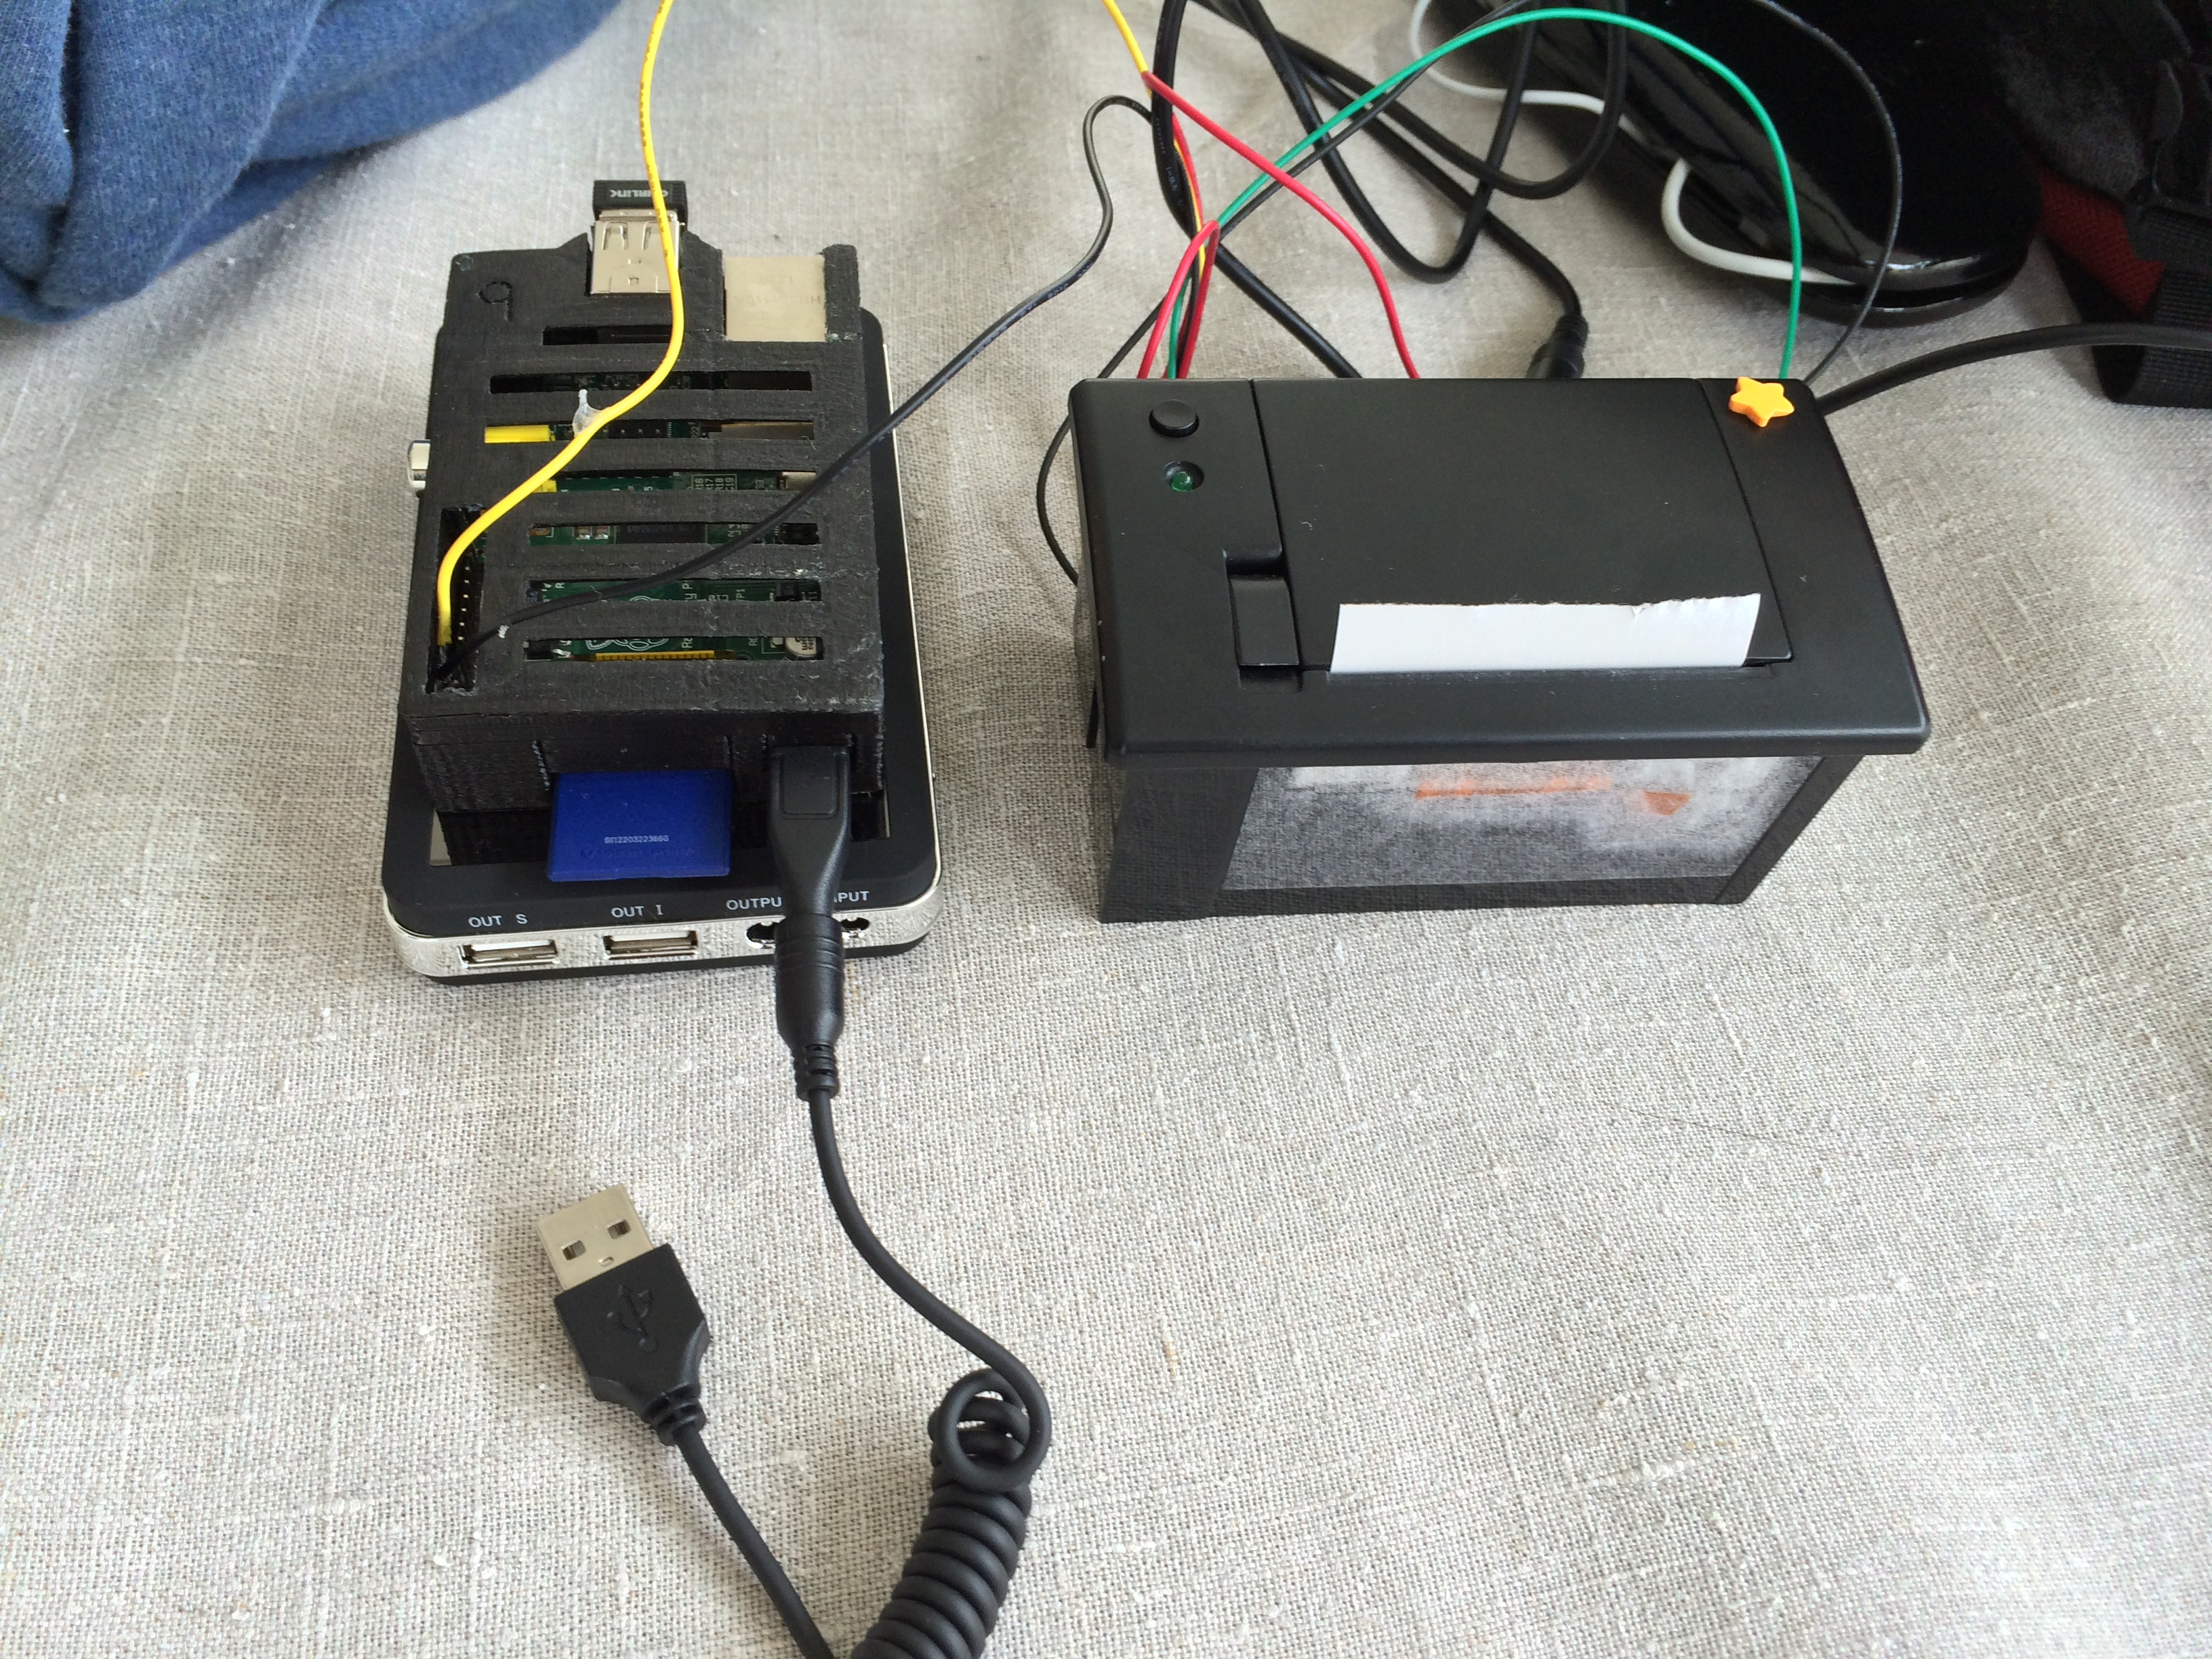 raspberry pi computer running off a battery and connected to a thermal printer